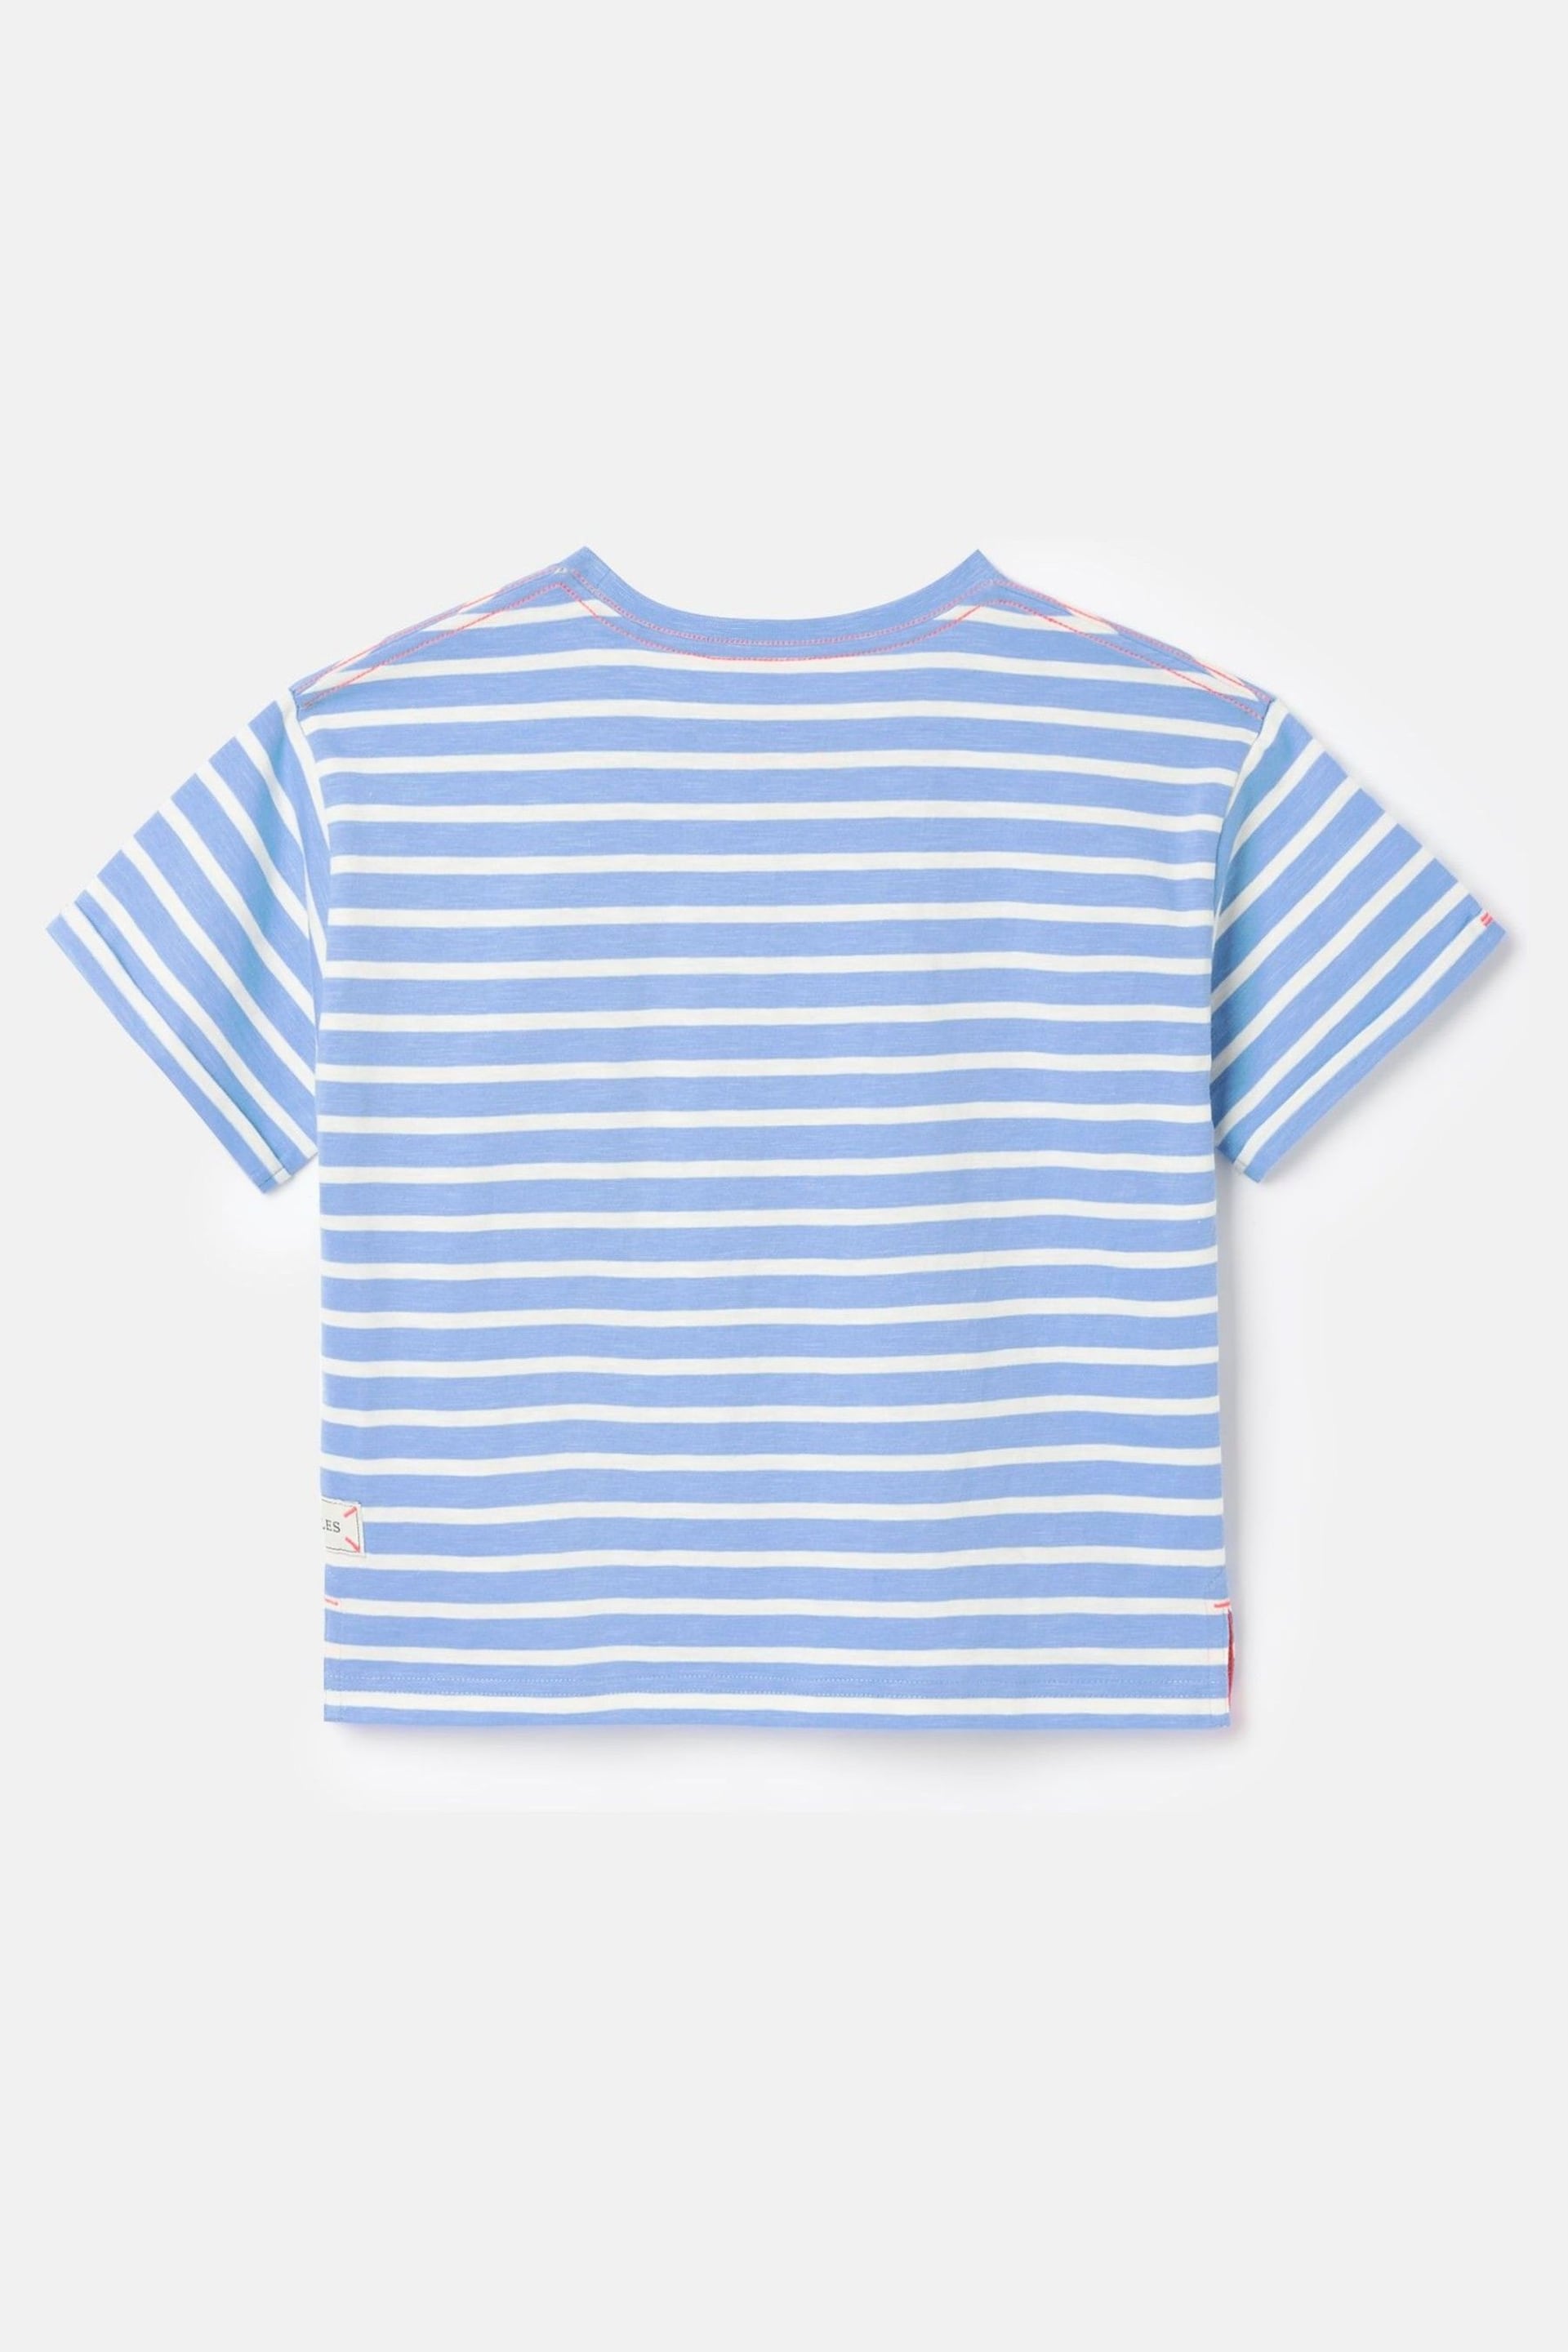 Joules Fun Days Blue Short Sleeve Graphic T-shirt - Image 4 of 7